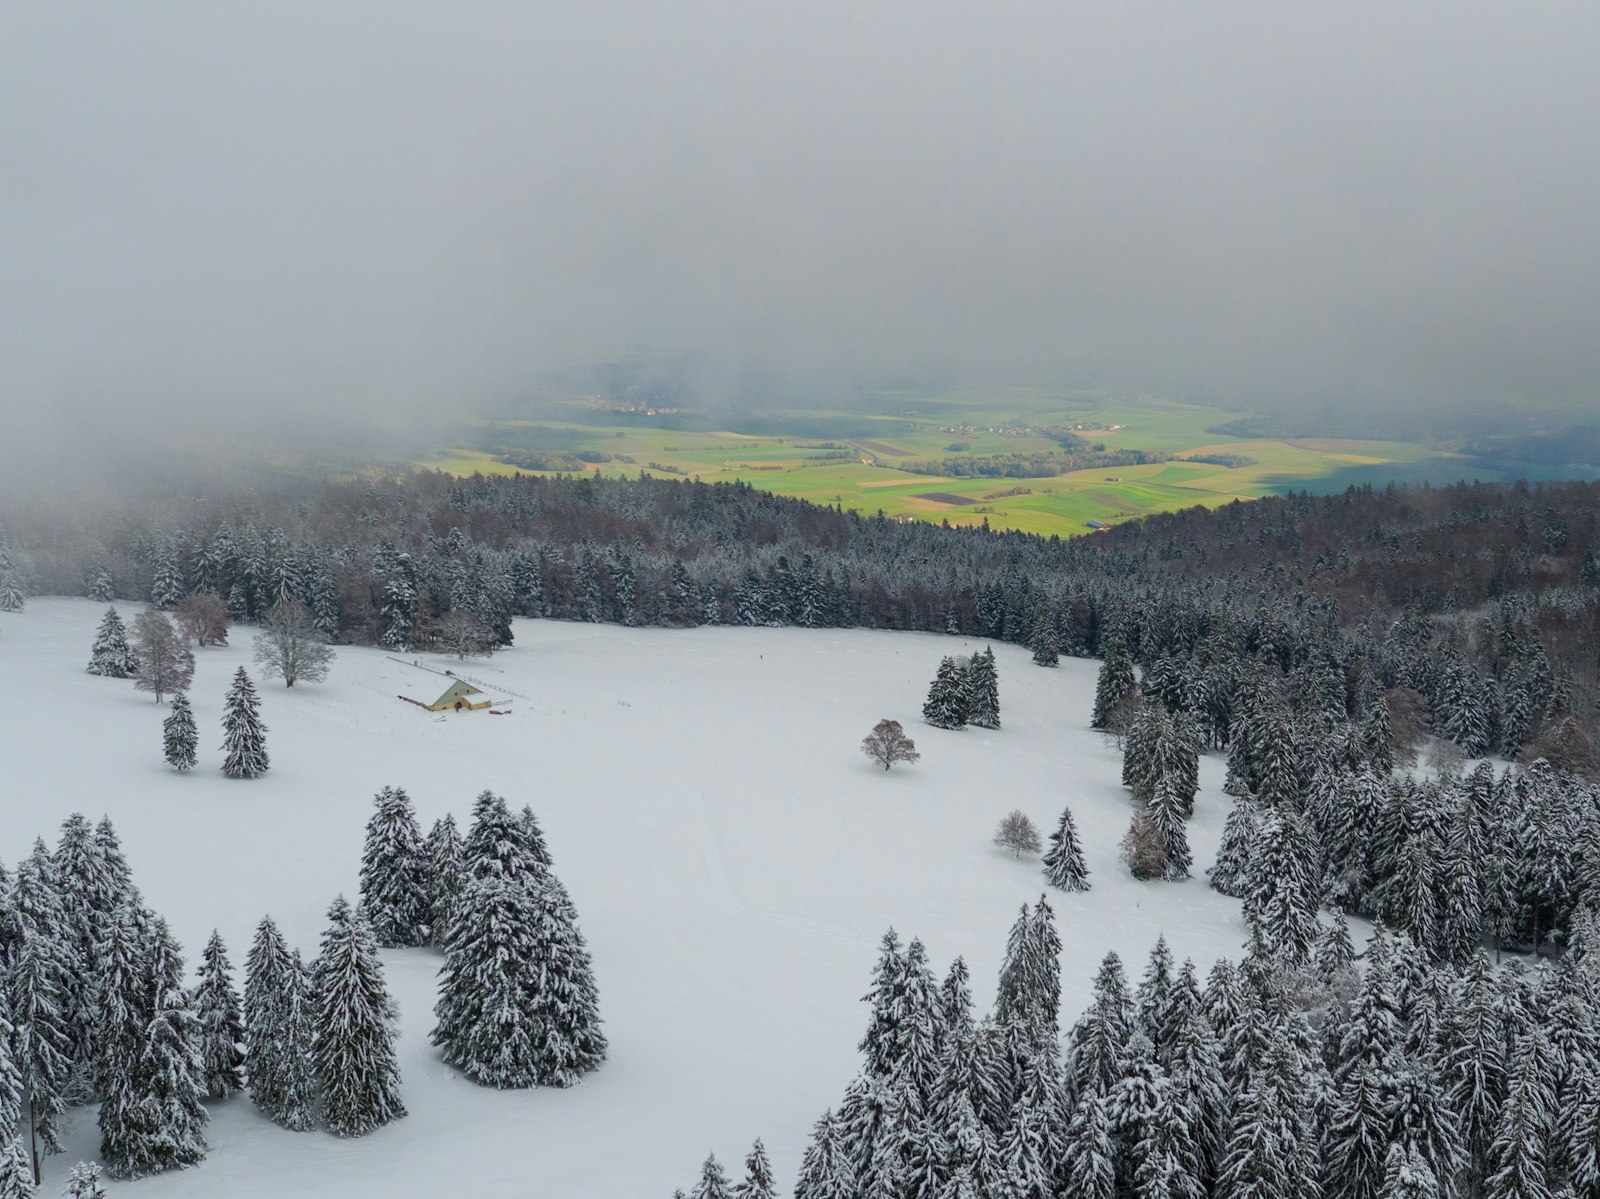 DJI FC550 sample photo. Snow covered pine trees photography